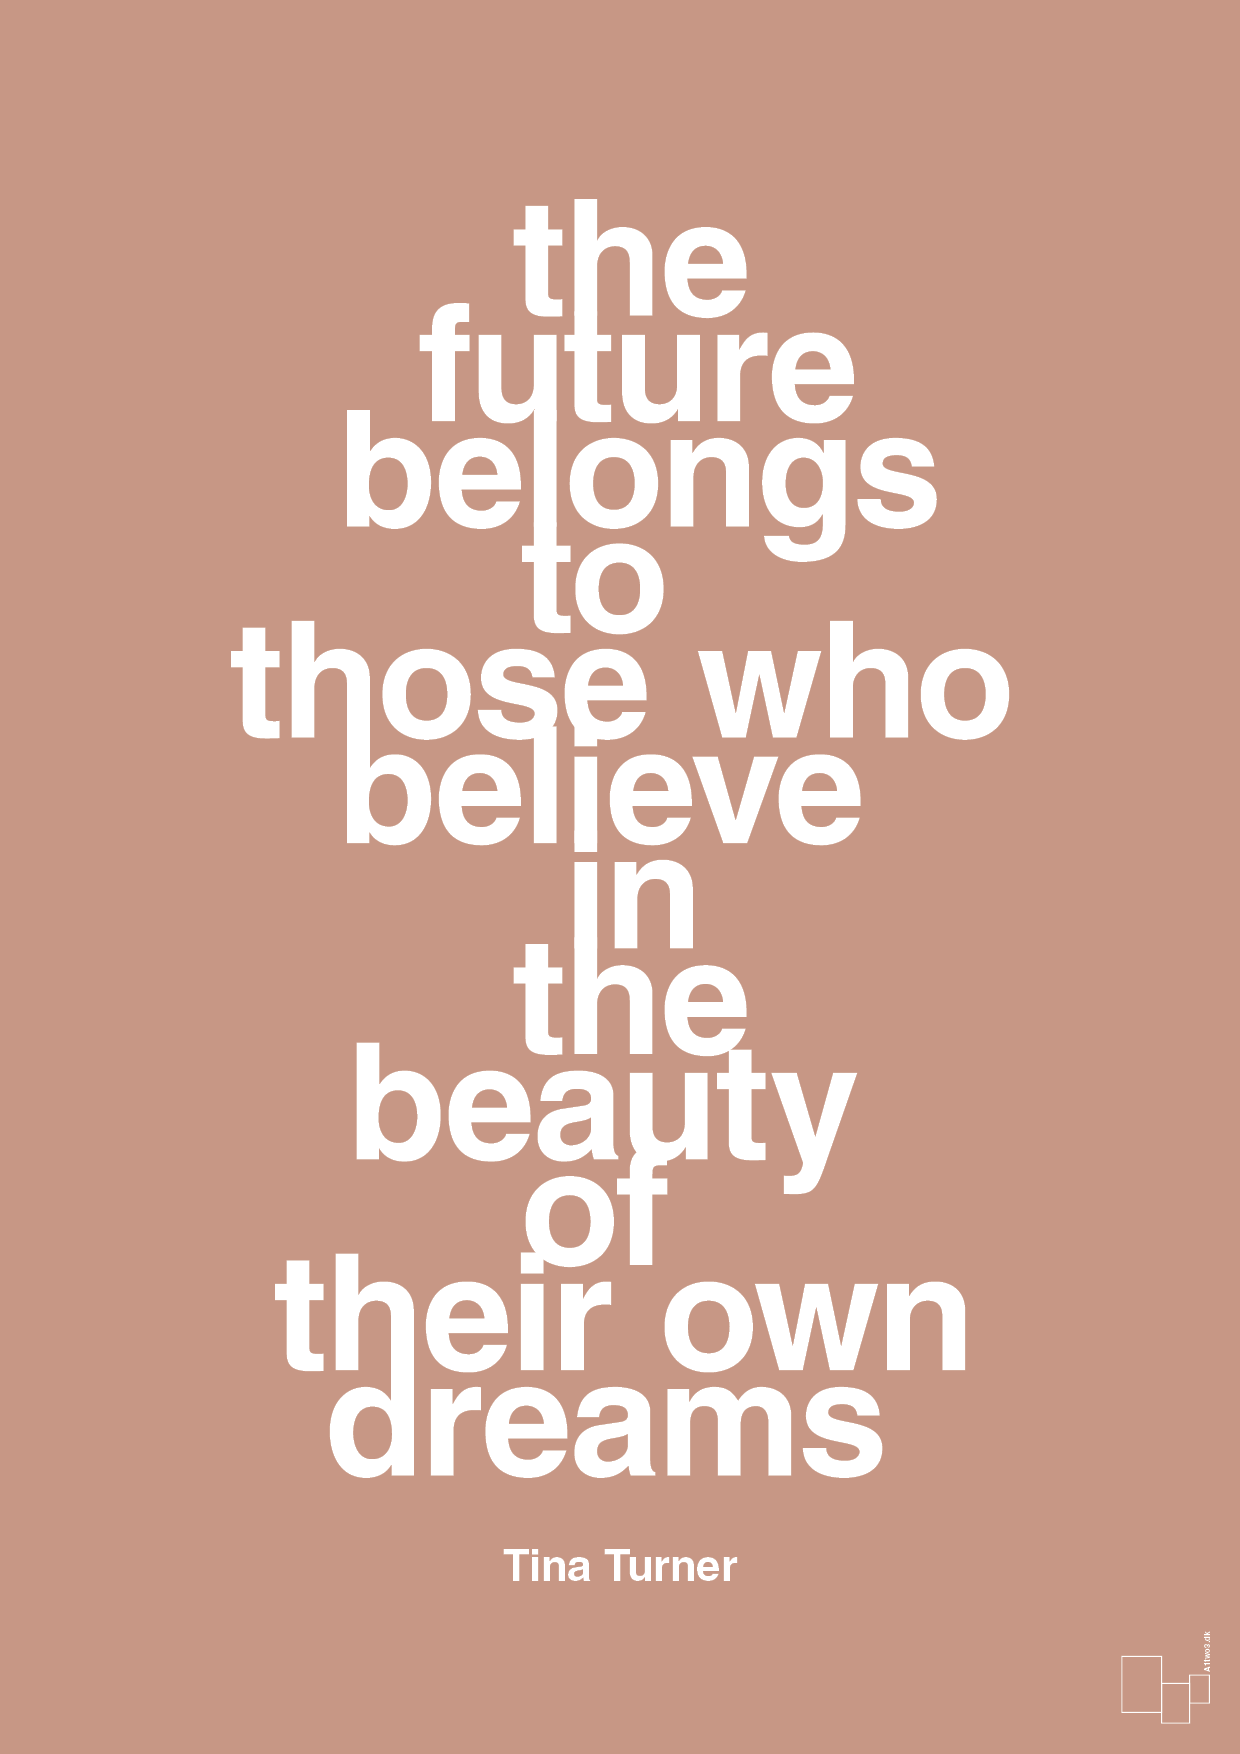 the future belongs to those who believe in the beauty of their own dreams - Plakat med Citater i Powder